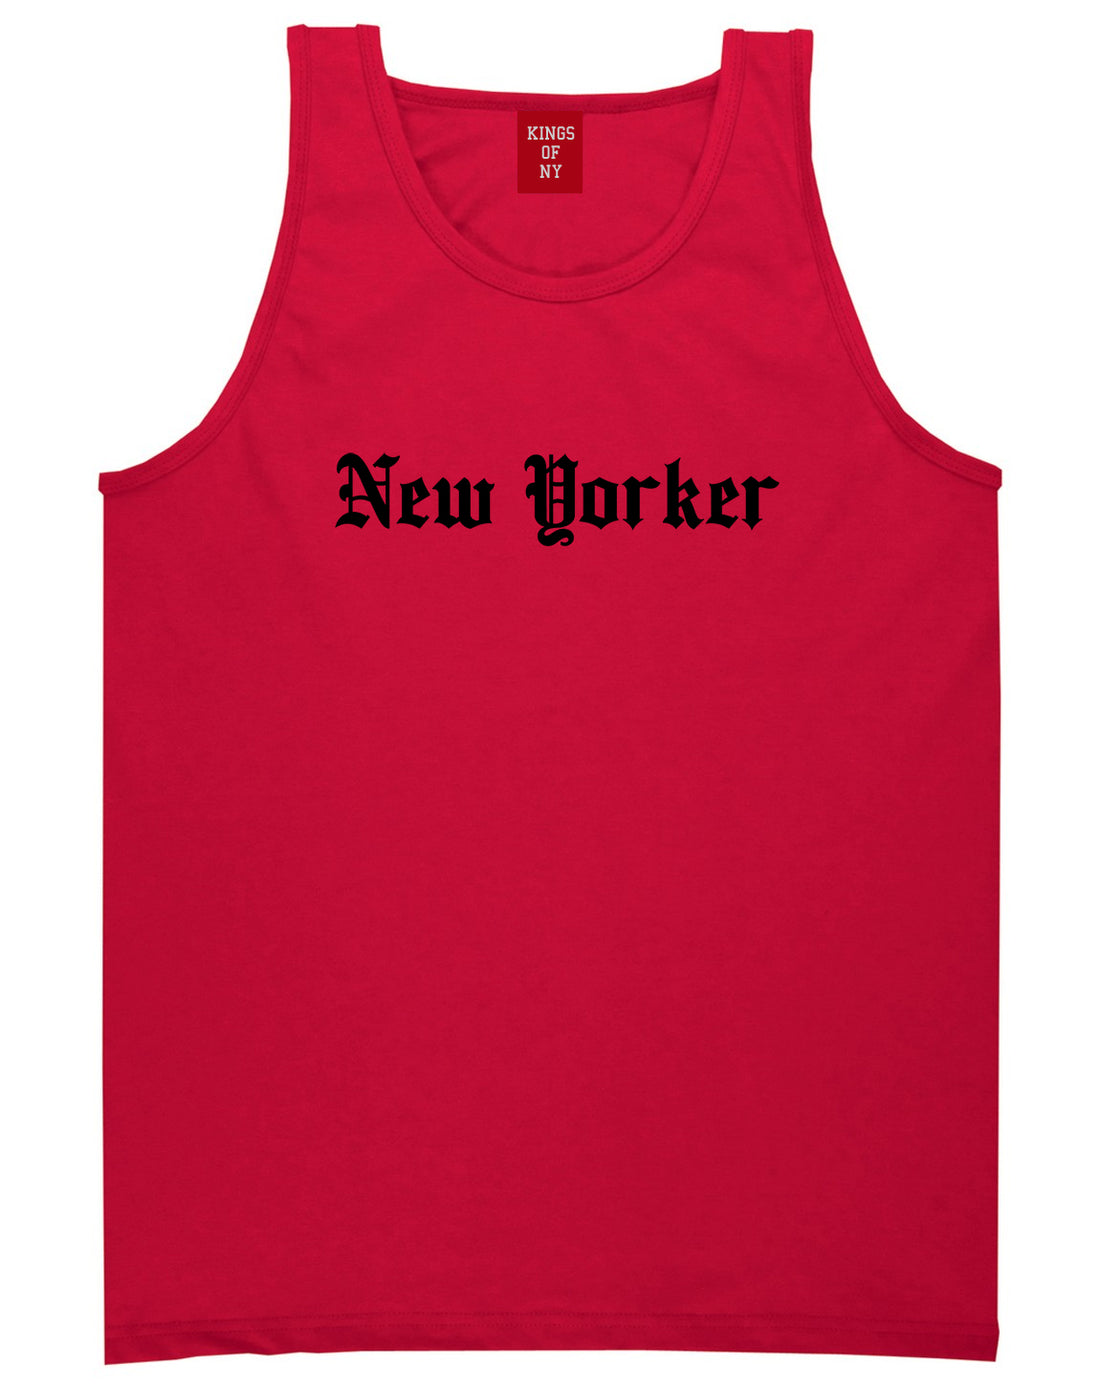 New Yorker Old English Mens Tank Top Shirt Red by Kings Of NY